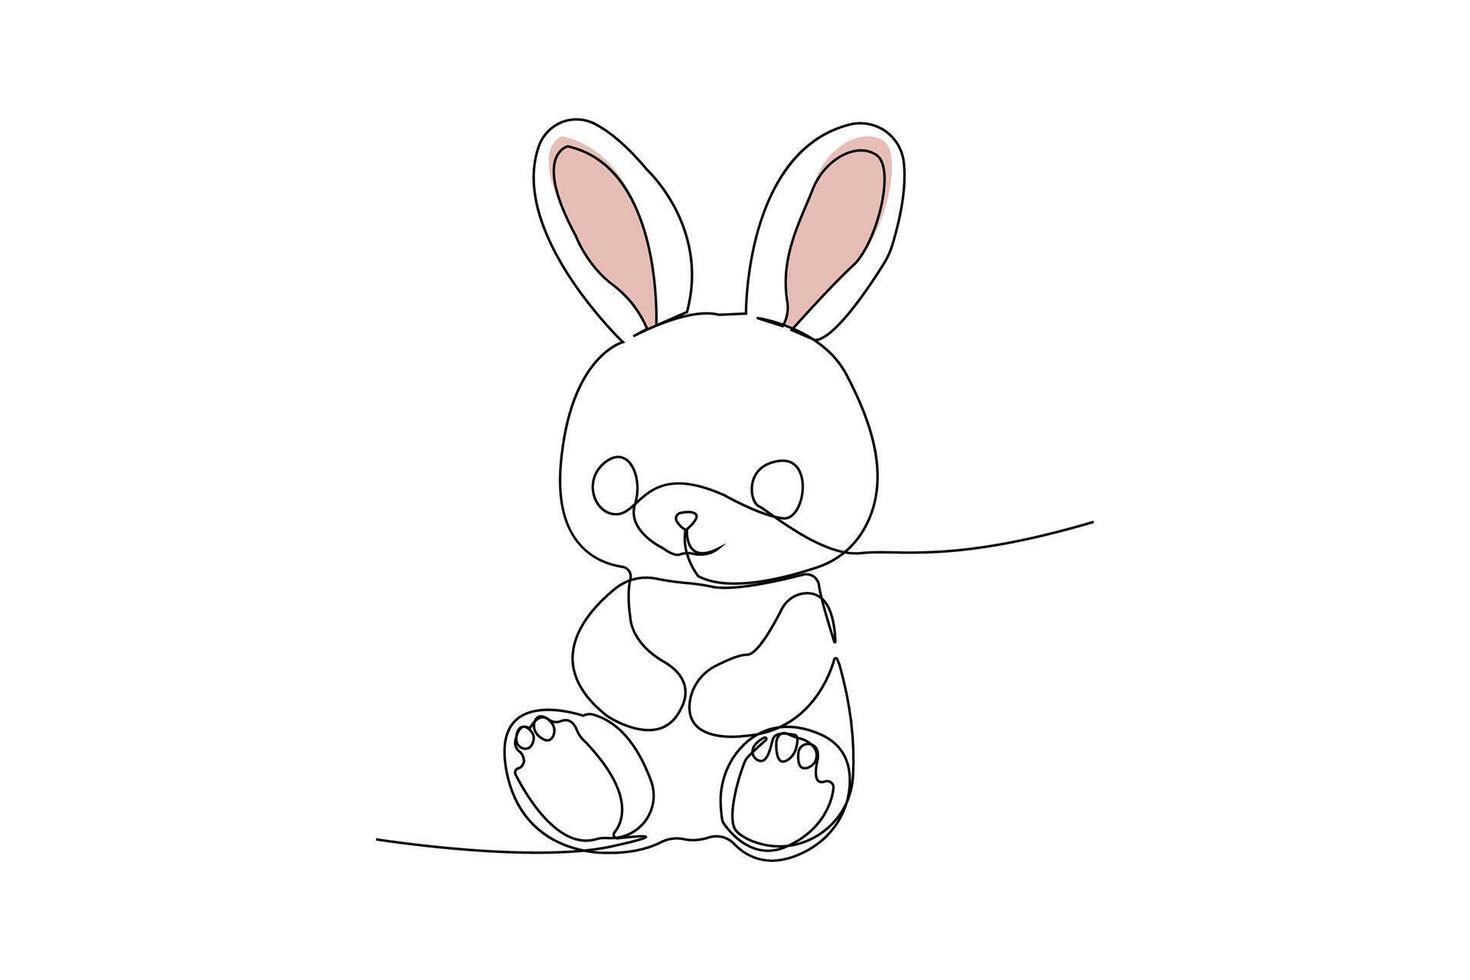 Cute bunny doll one-line art drawing. Bunny toy continuous outline vector